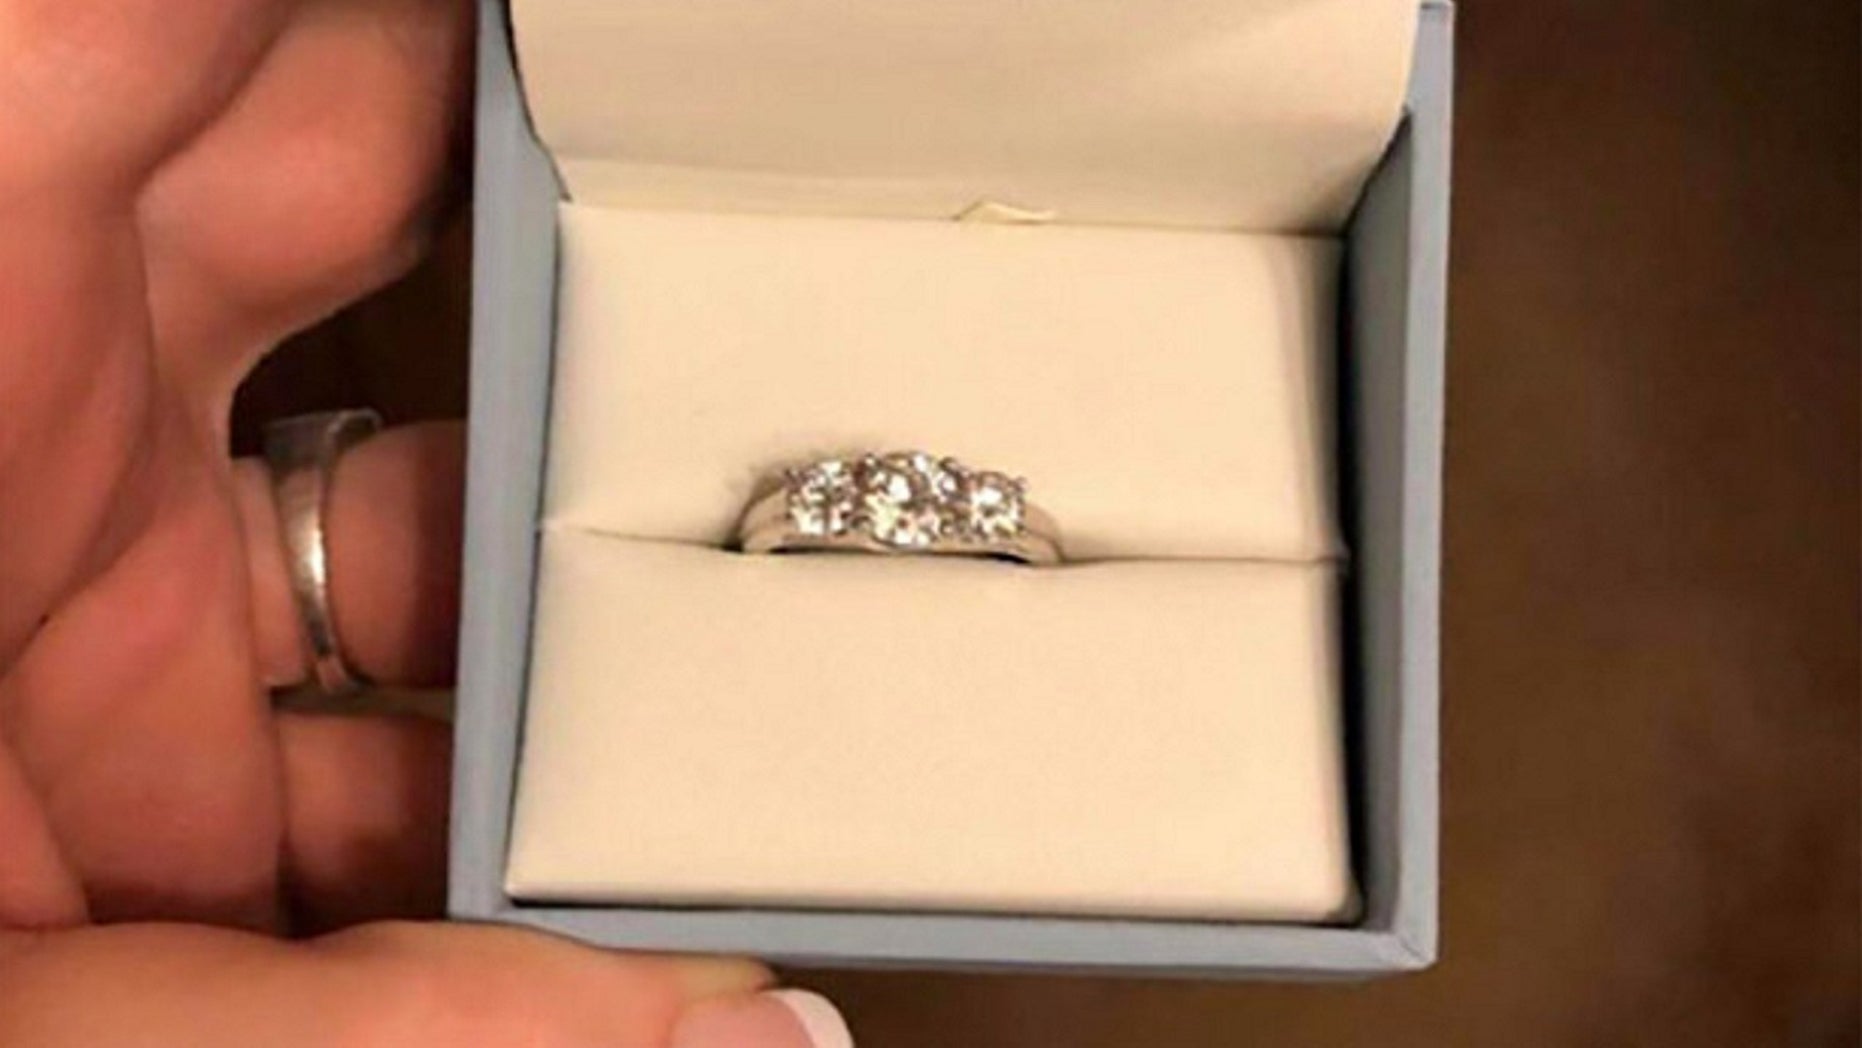 A woman found her diamond ring before the proposal and reportedly "ring shames" herself through a Facebook group.